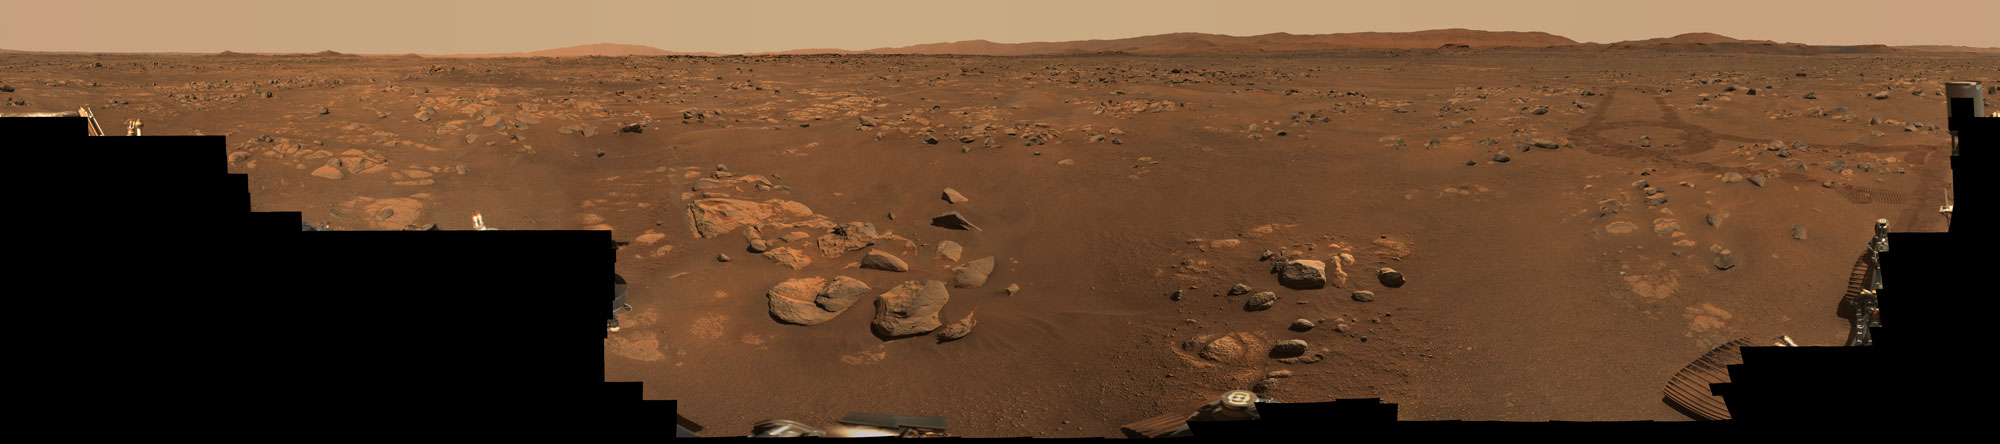 NASA's Perseverance Mars rover used its Mastcam-Z imaging system to capture this 360-degree panorama of "Van Zyl Overlook," where the rover was parked as the Ingenuity helicopter performed its first flights. The 2.4 billion-pixel panorama is made up of 992 individual images stitched together.